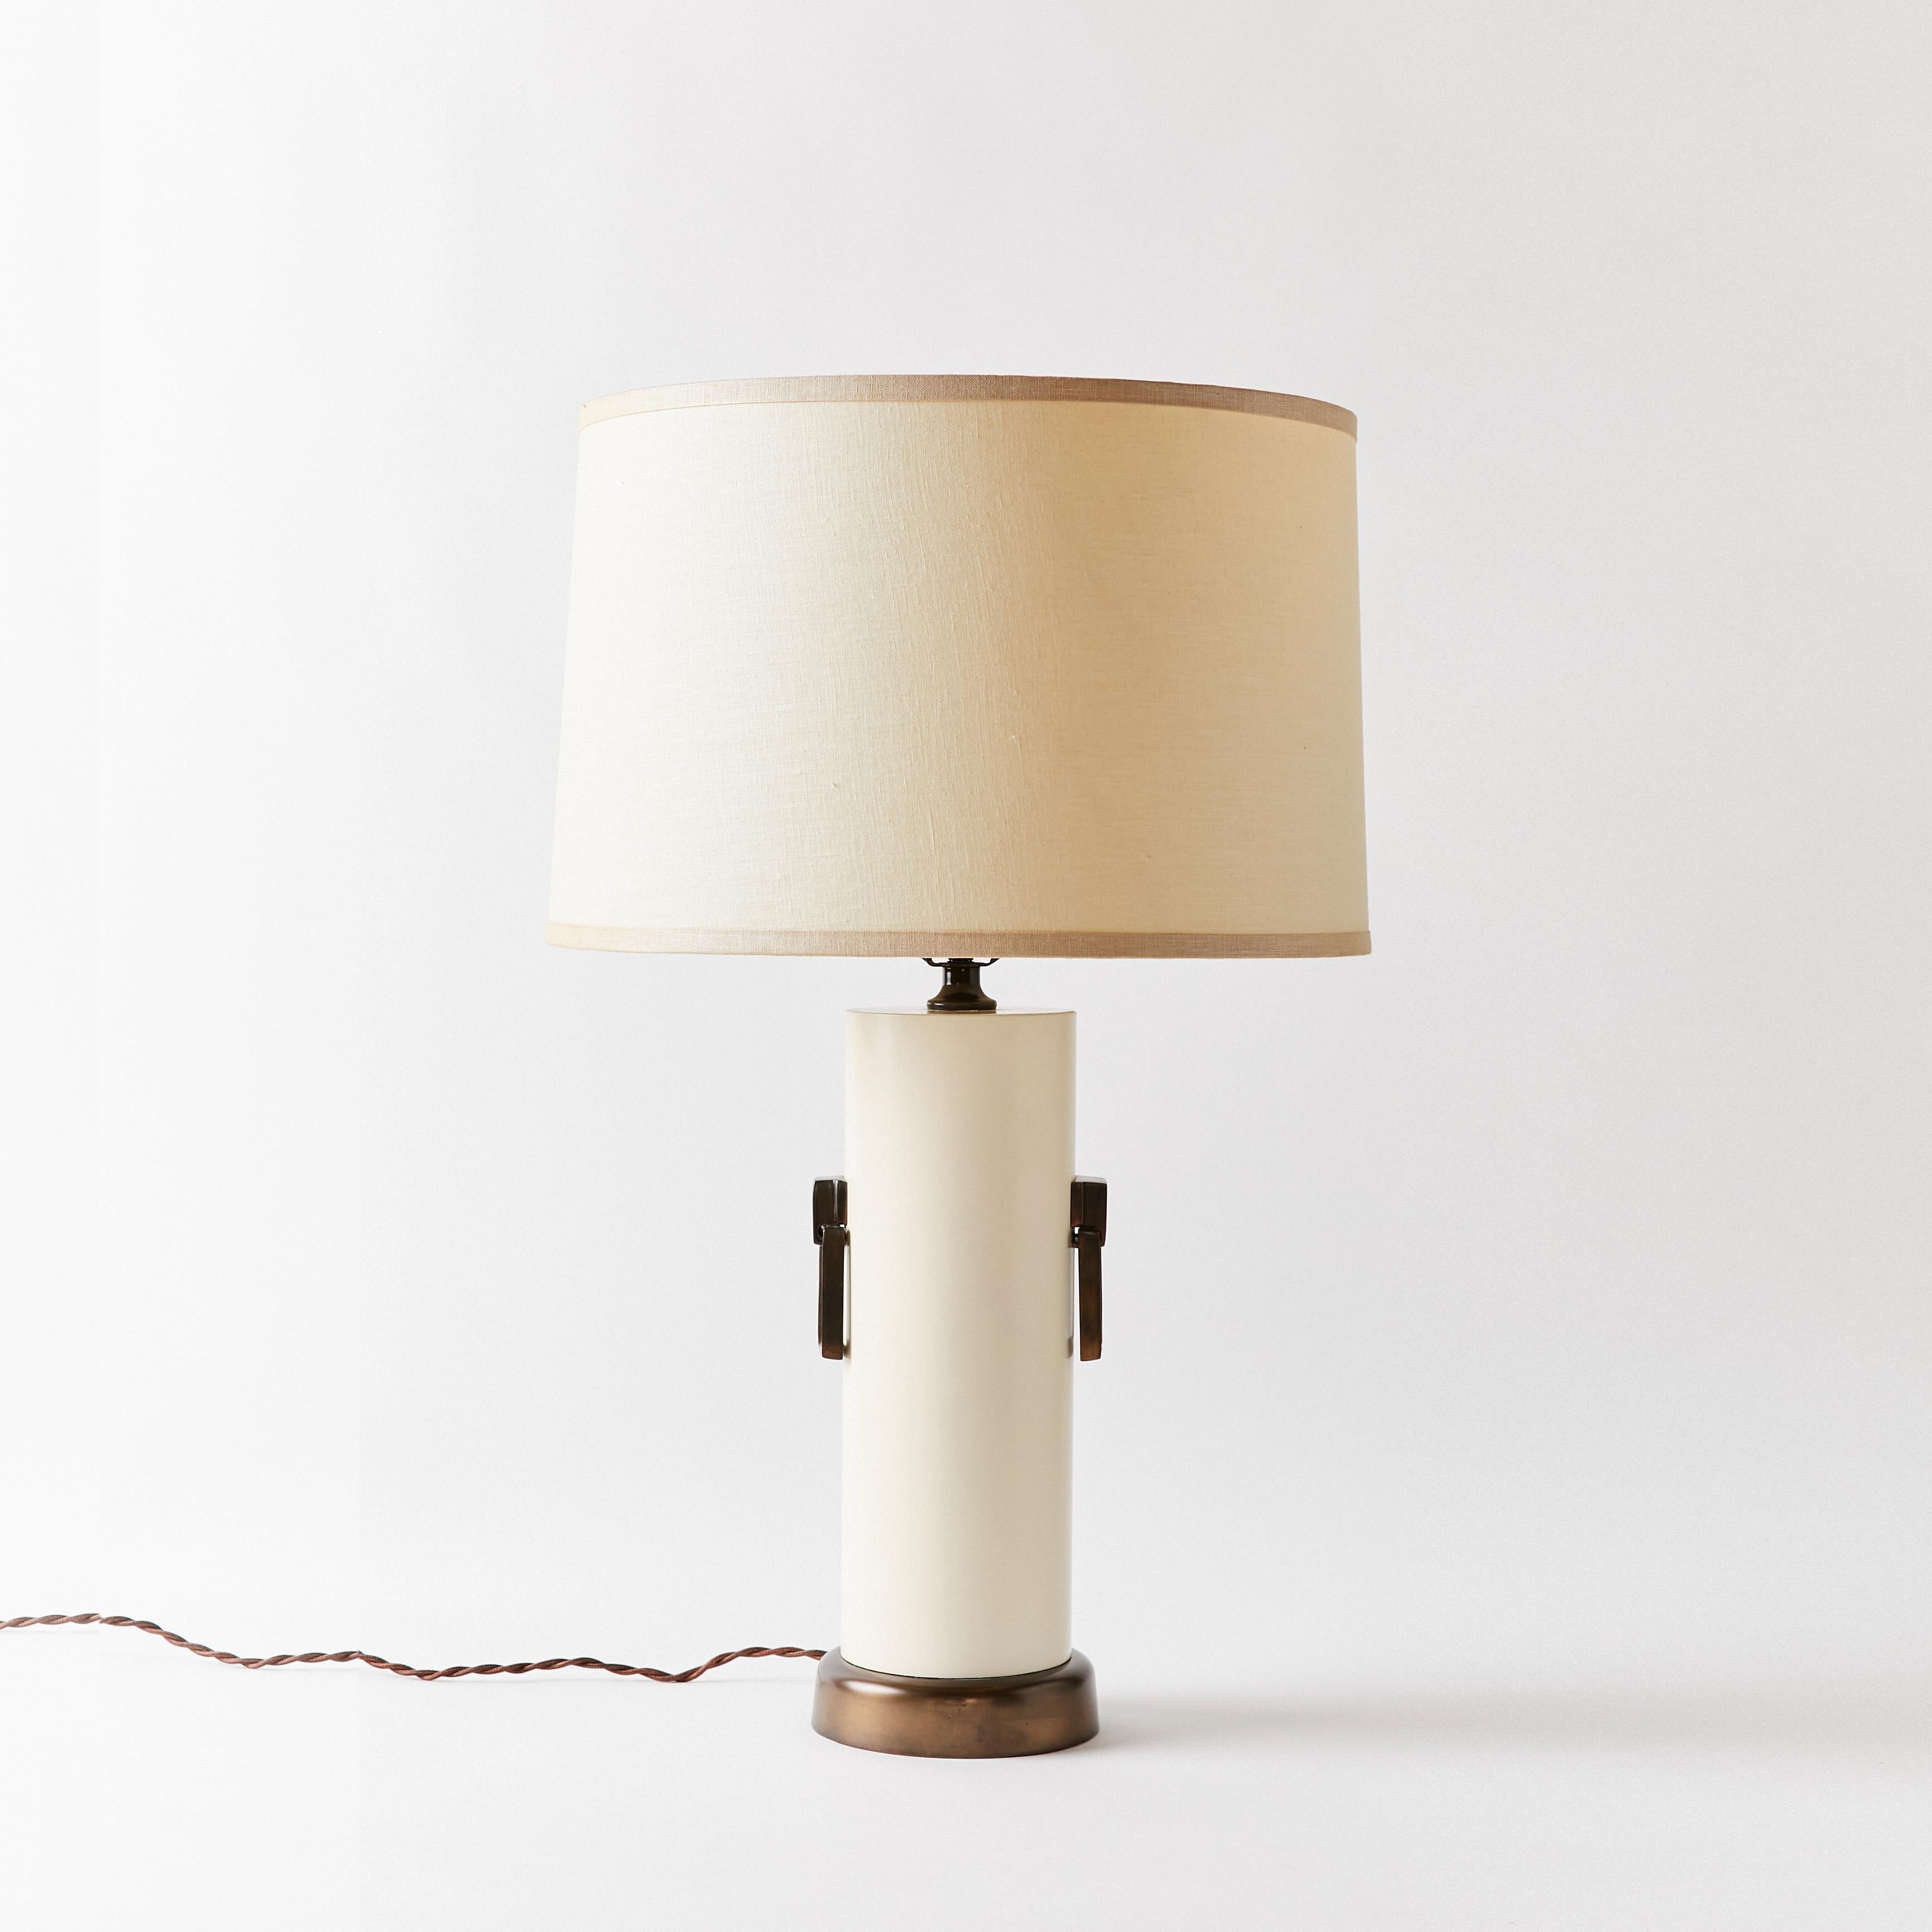 Cylindrical shape table lamp finished in off white and siting on an antique bronze base. Rectangular pull rings in antique bronze show on each side of the body.